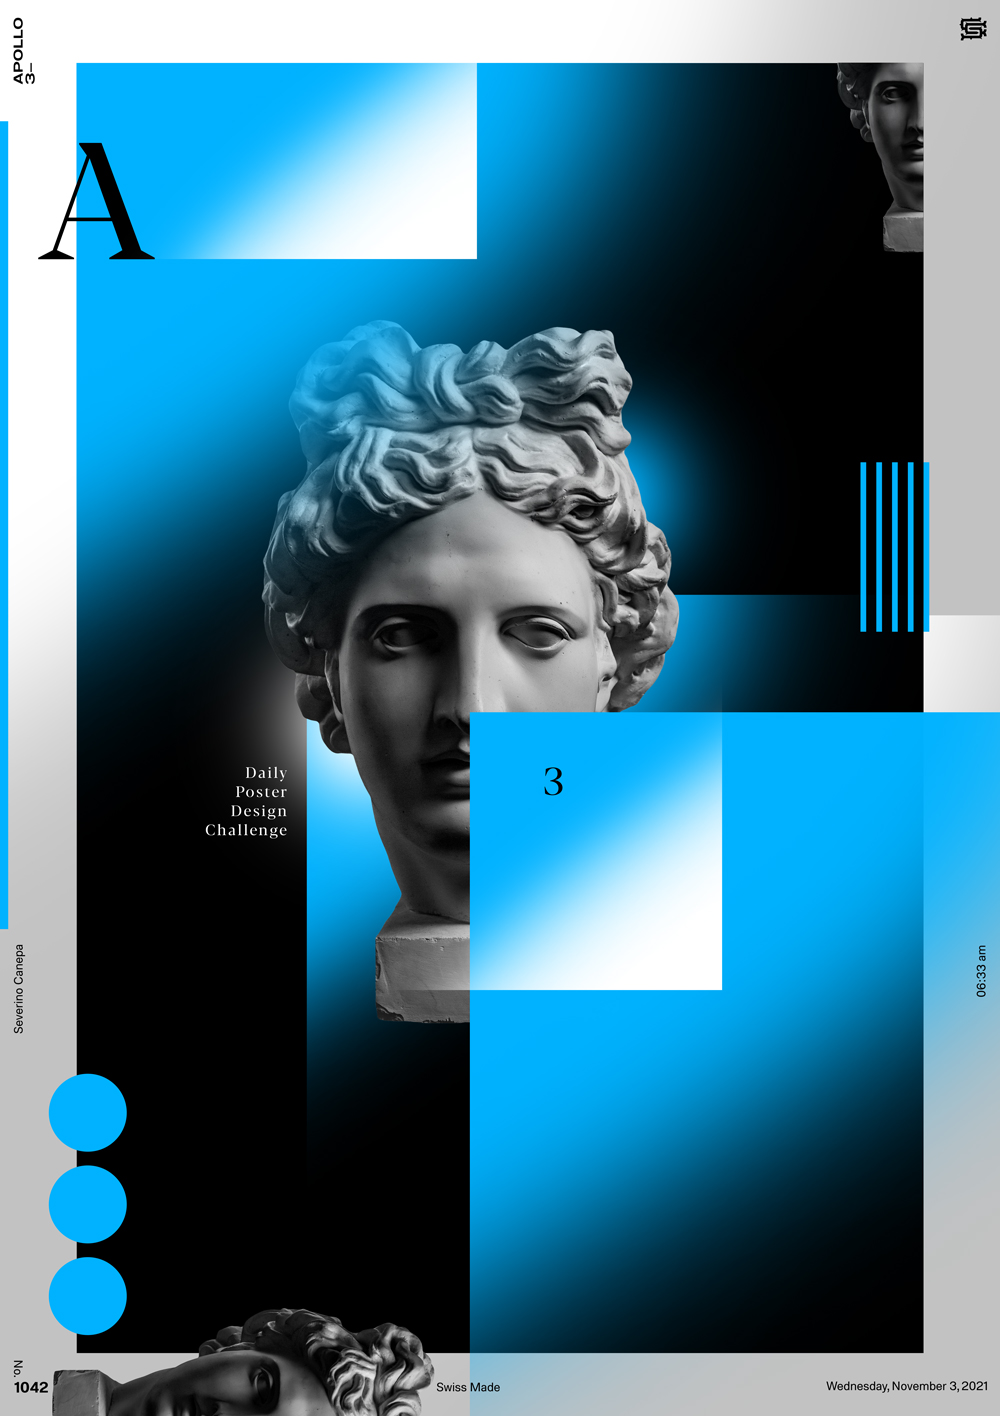 Graphic creation I made in Photoshop with forms and Apollo's Statue